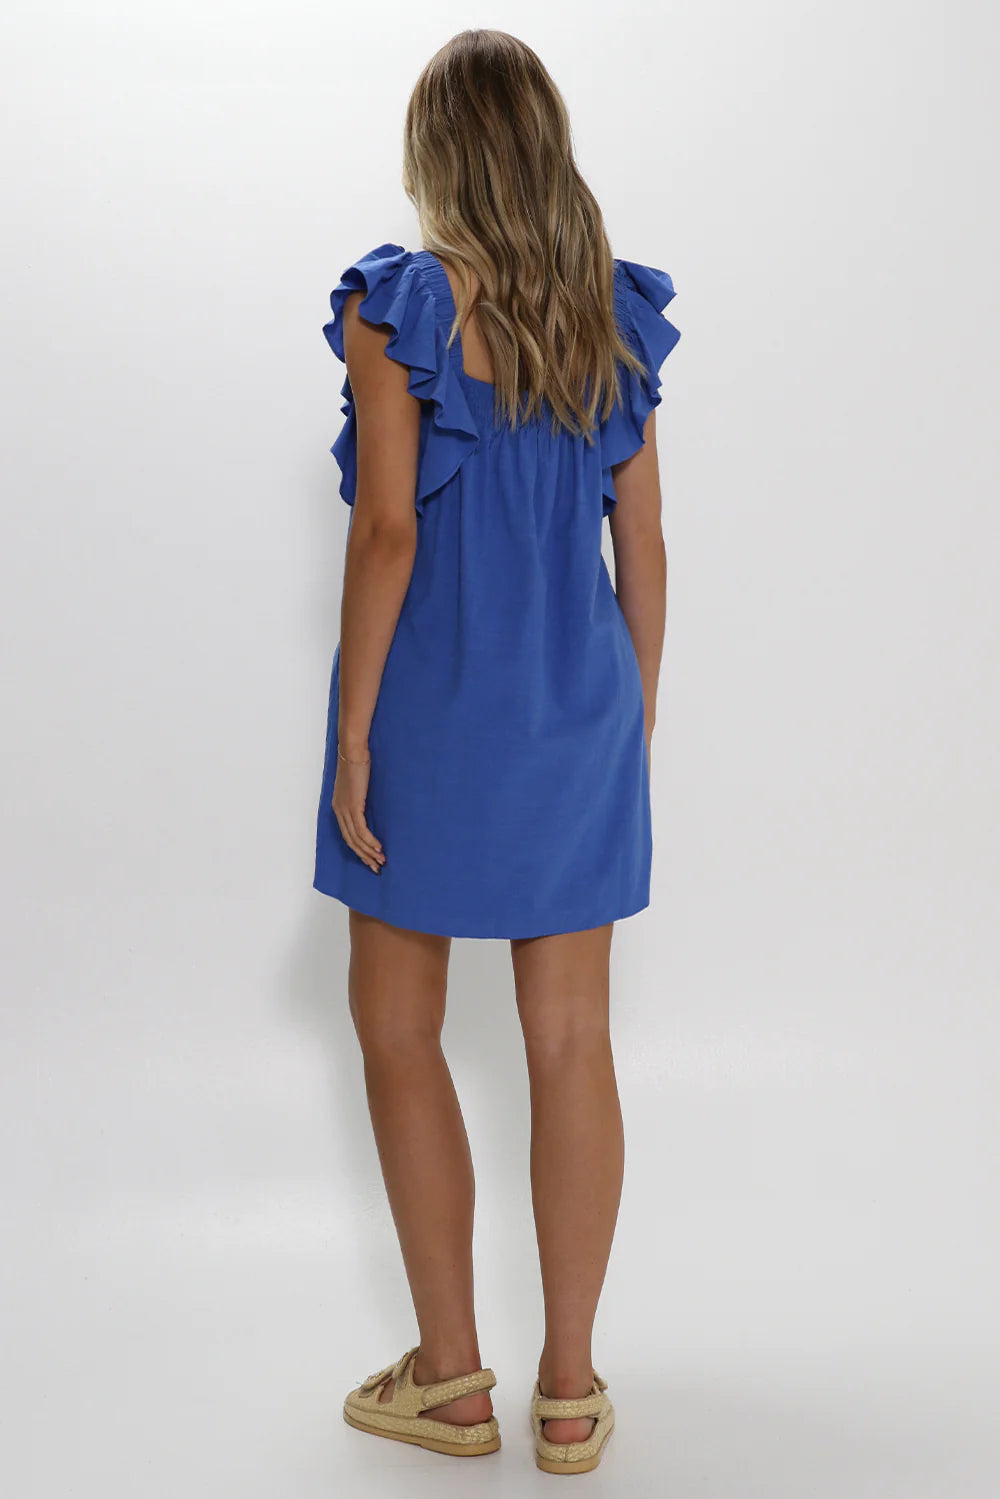 Model is wearing Essie dress from Lost in Lunar in blue with shoulder ruffle details available at UniKoncept in Waterloo